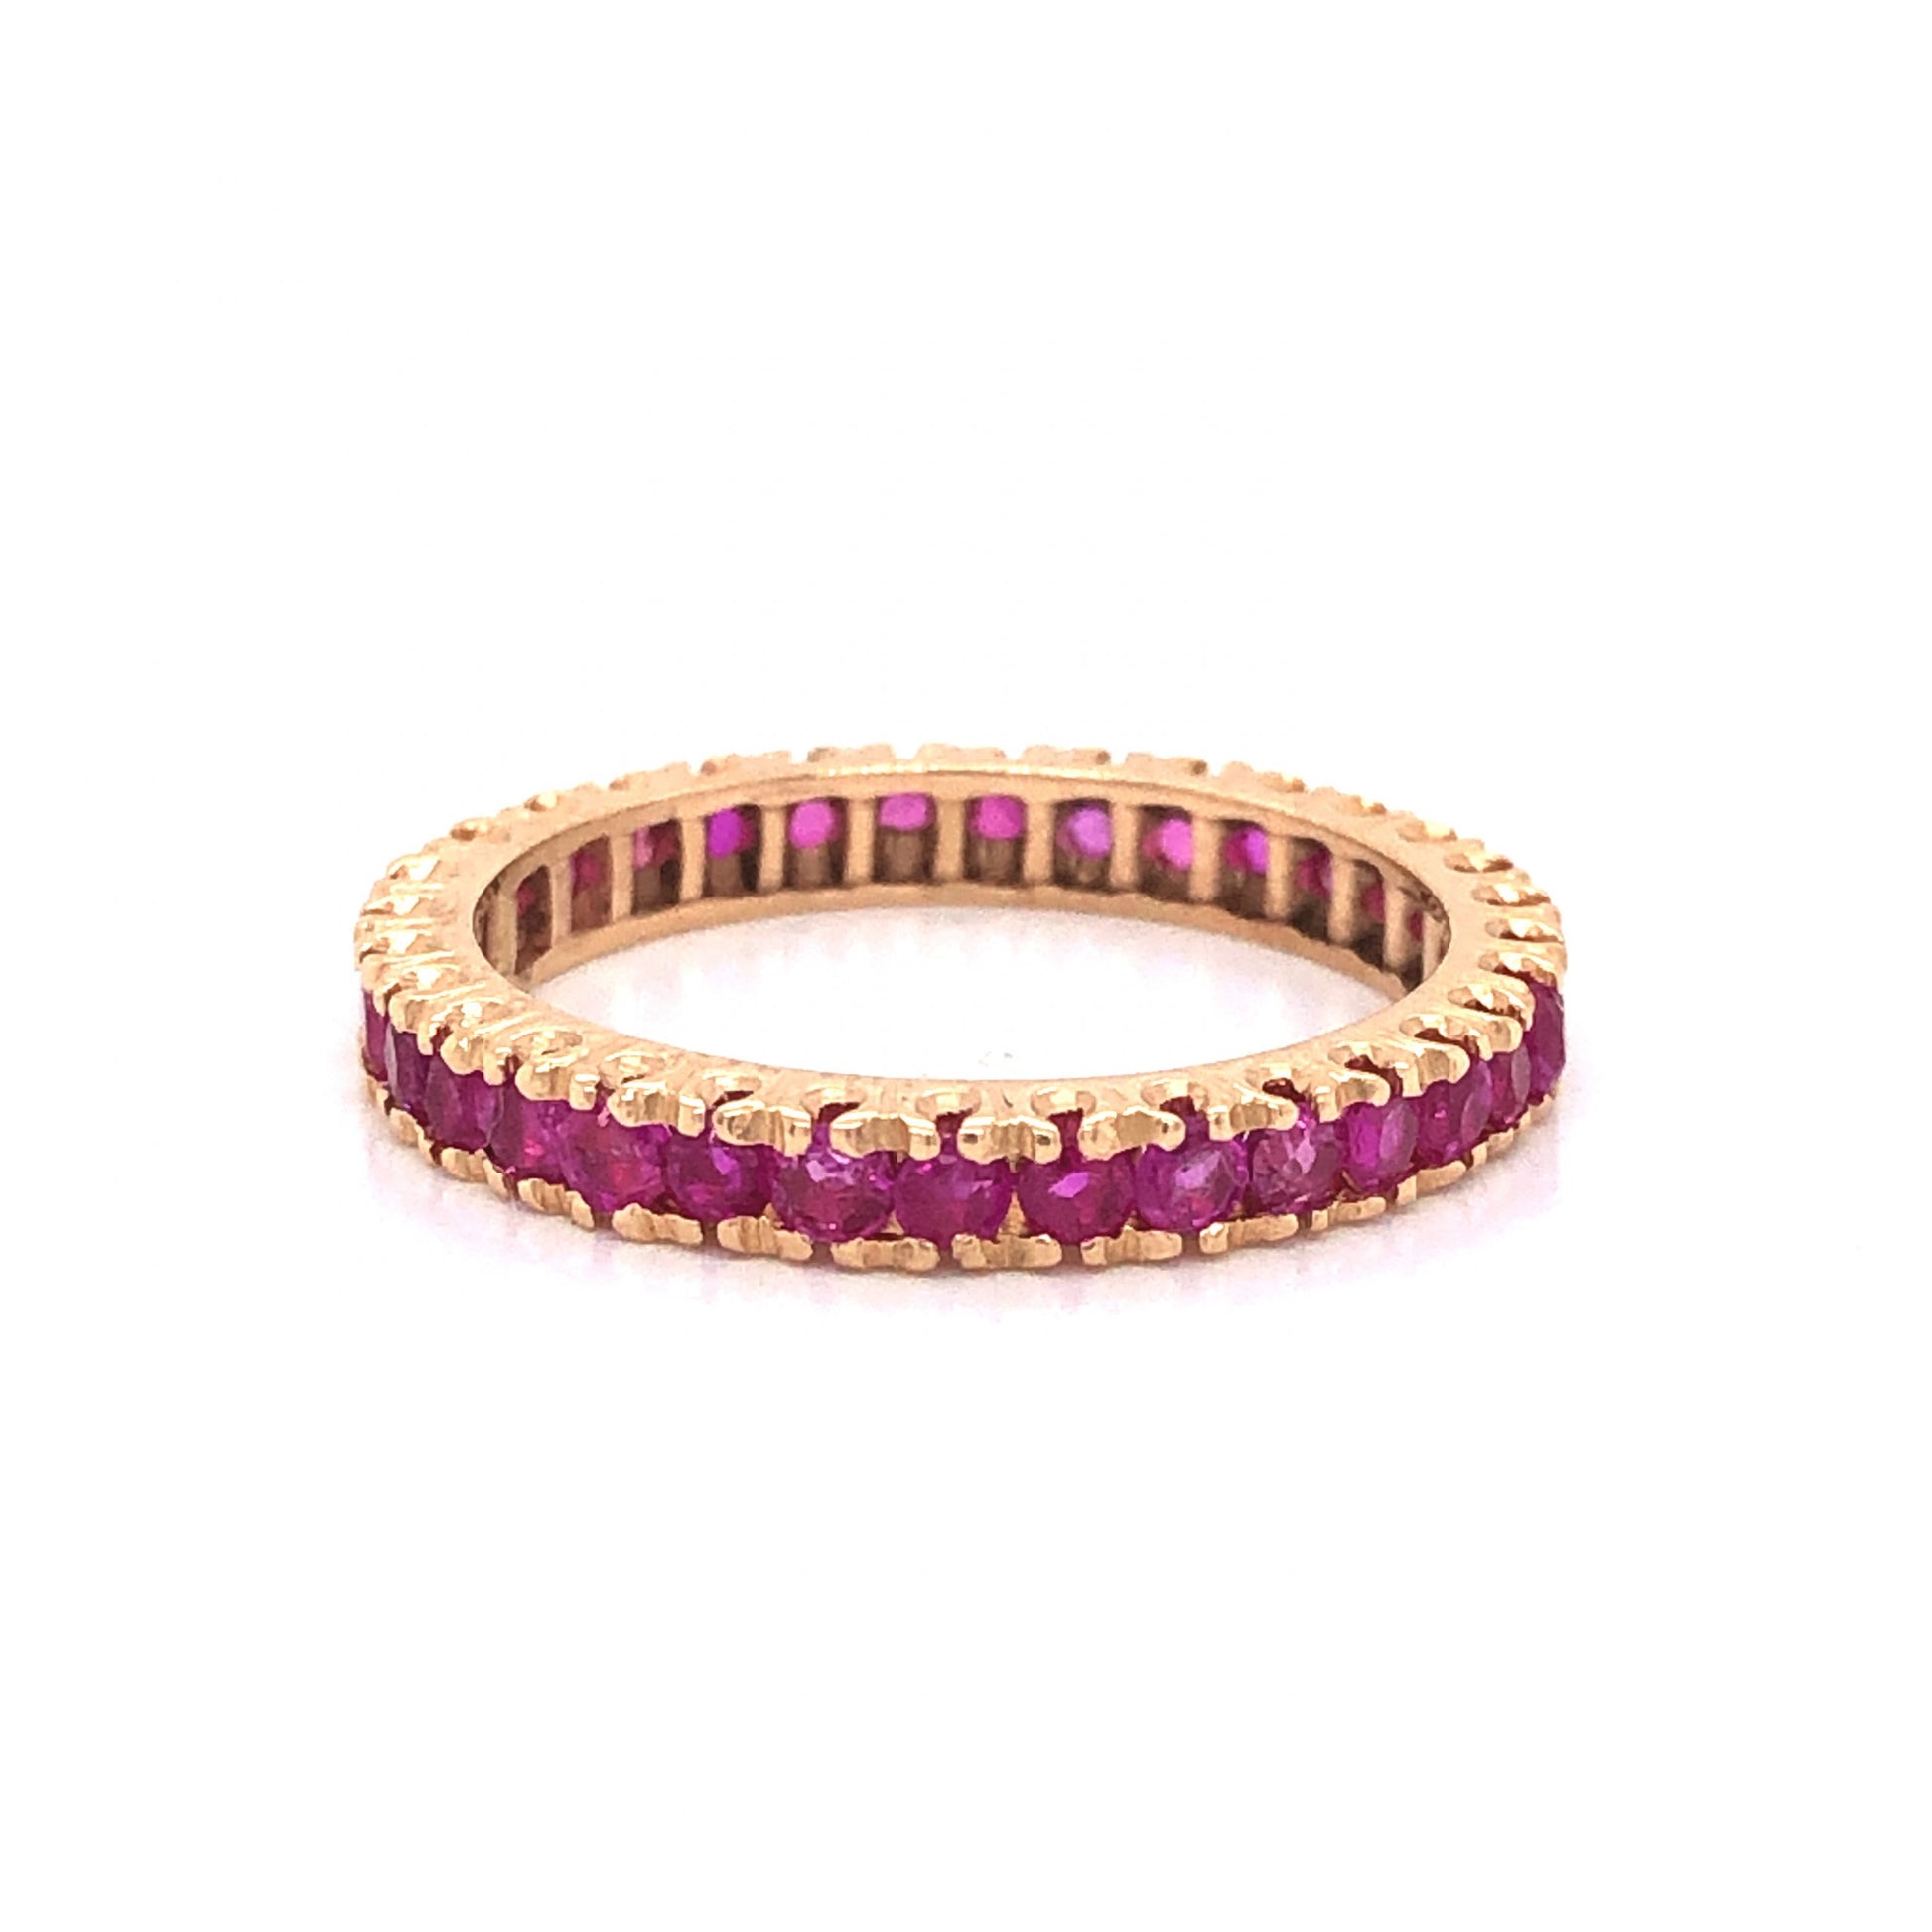 Modern Round Cut Ruby Eternity Wedding Band in 14k Yellow GoldComposition: 14 Karat Yellow Gold Ring Size: 7 Total Gram Weight: 2.4 g